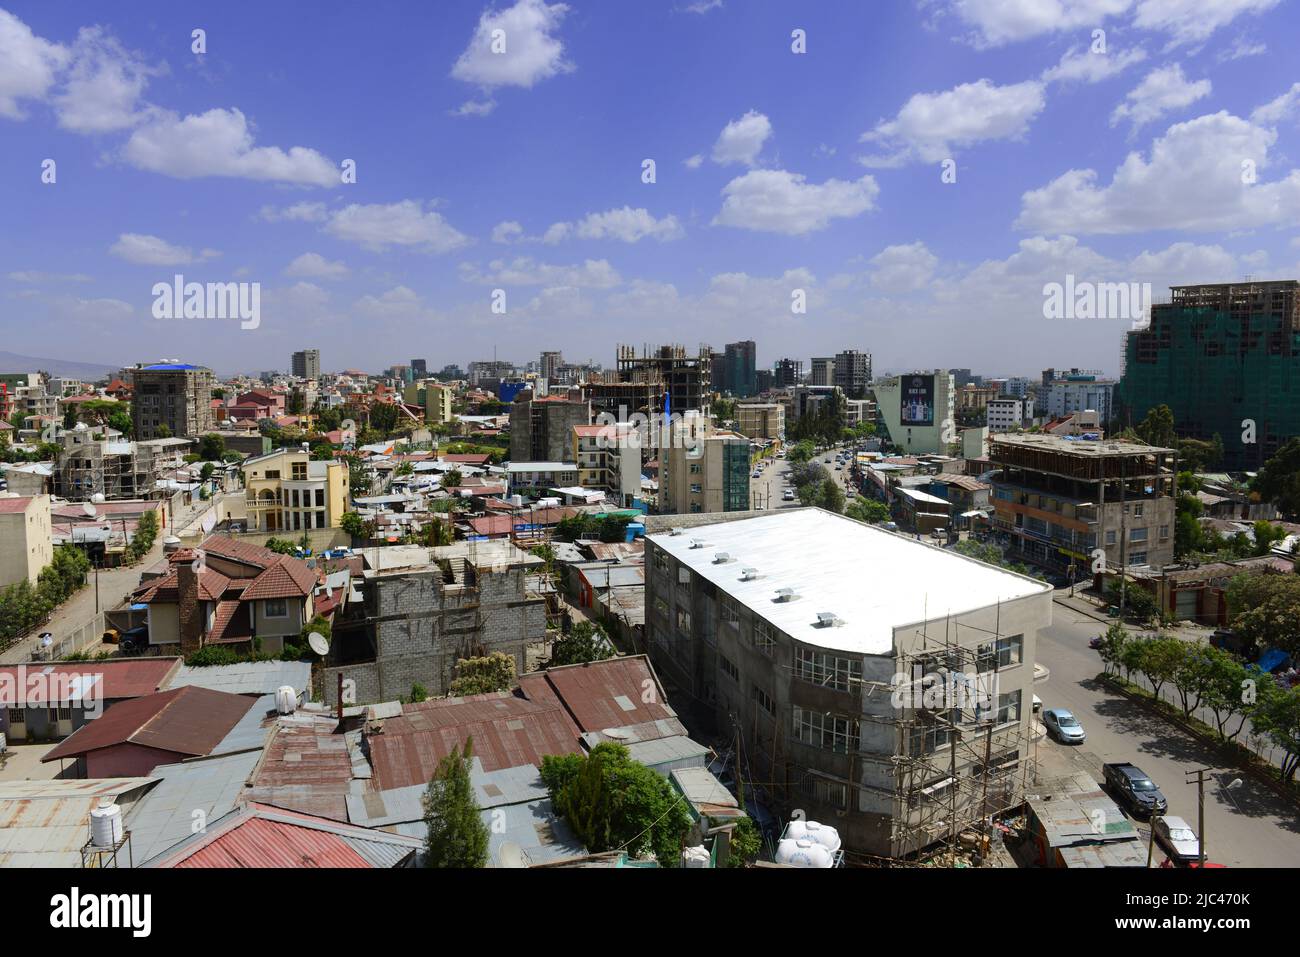 The changing skyline of Addis Ababa in Ethiopia. Stock Photo